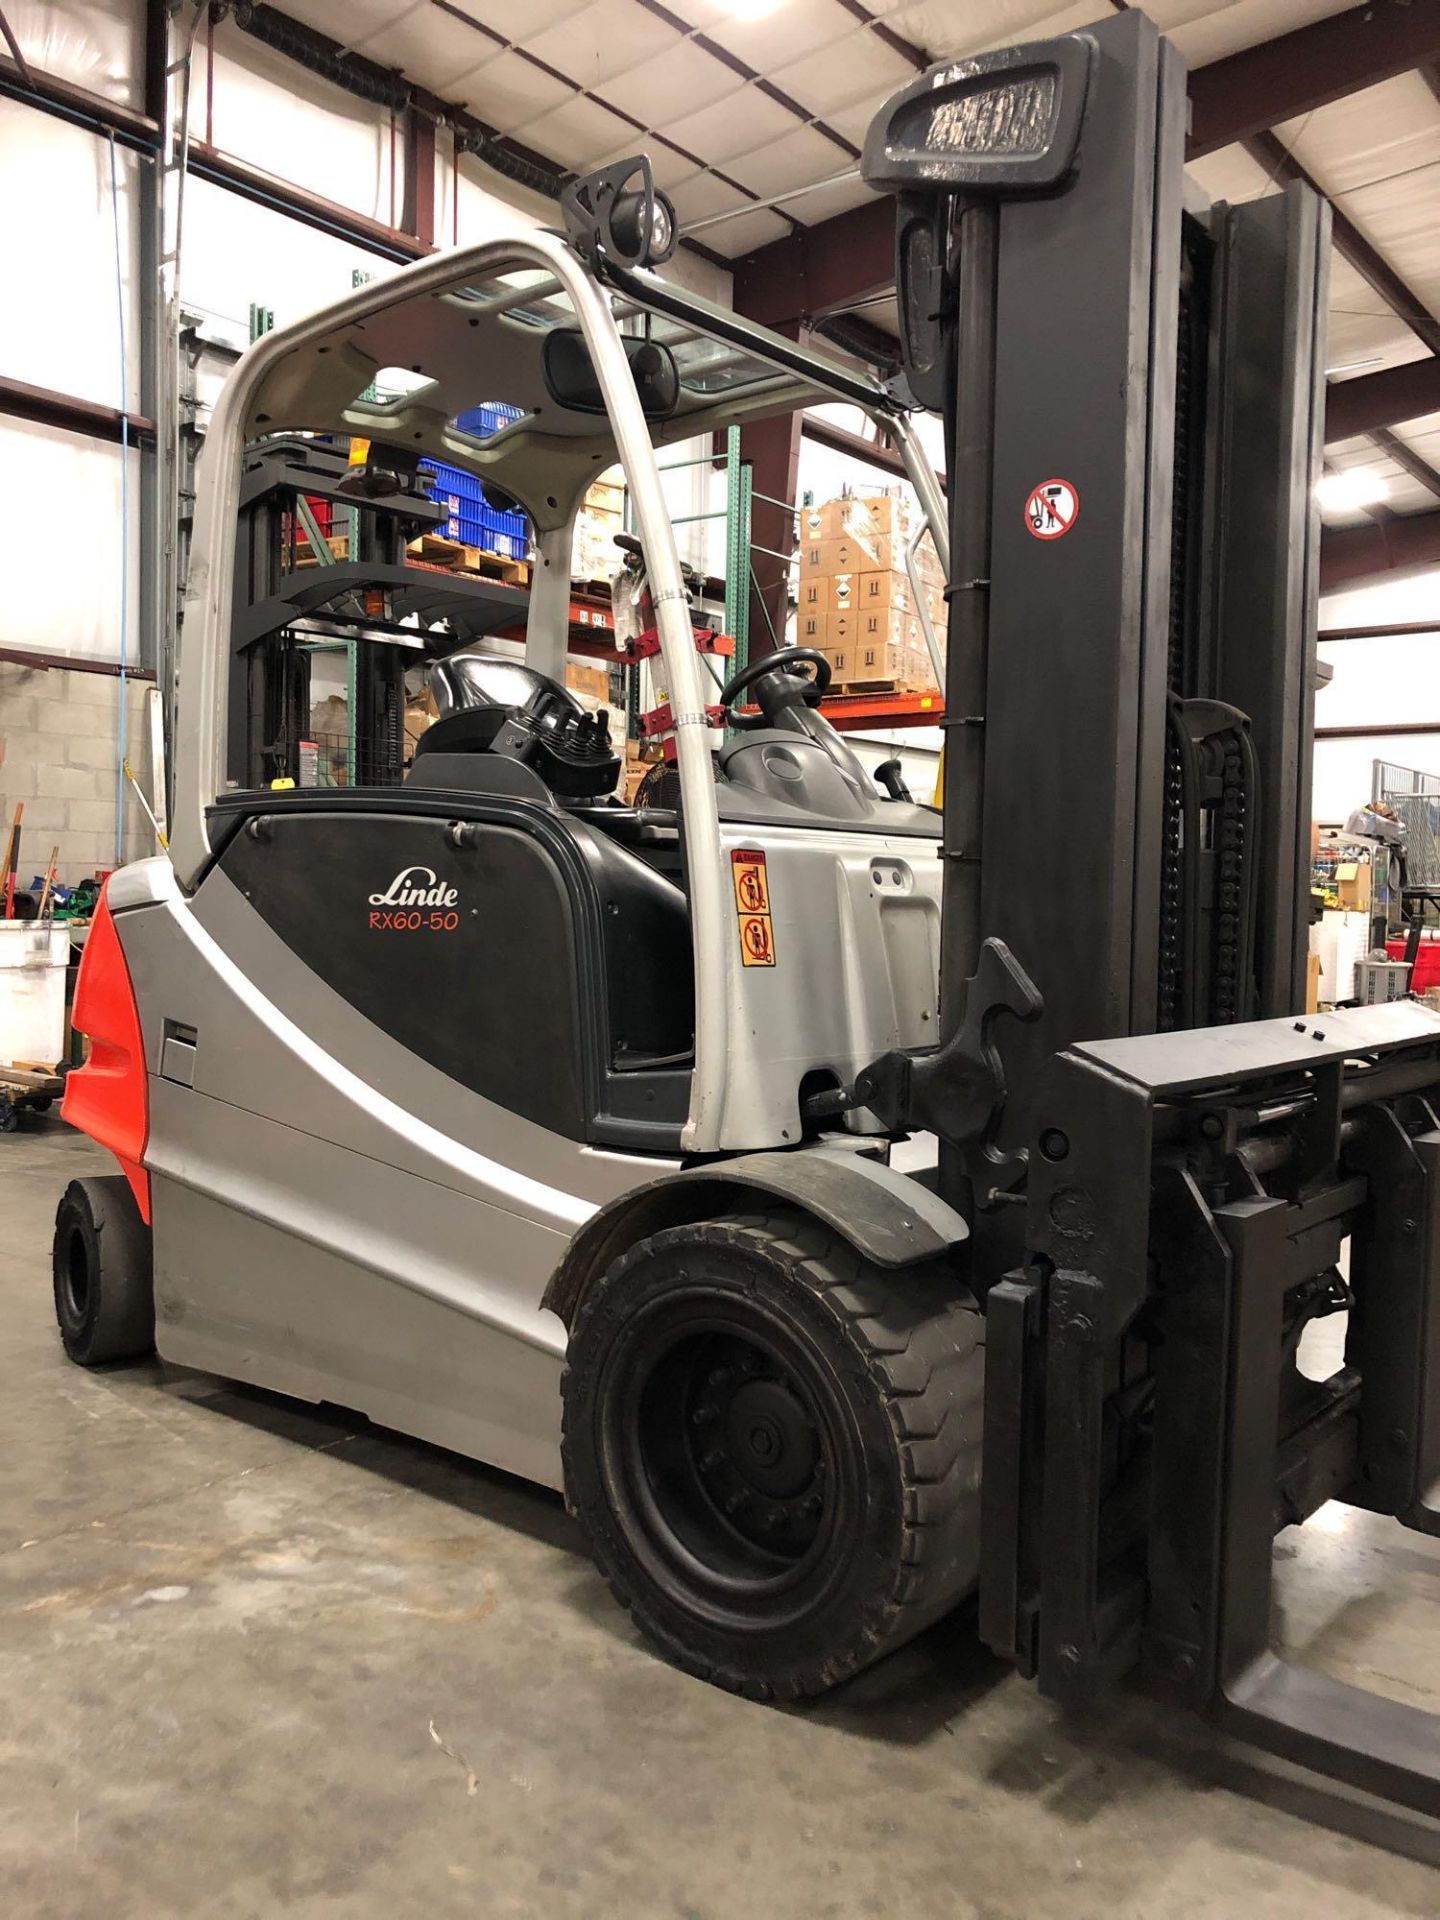 2009 LINDE ELECTRIC FORKLIFT MODEL RX60-50, 8,000 LB WEIGHT CAP - Image 3 of 12